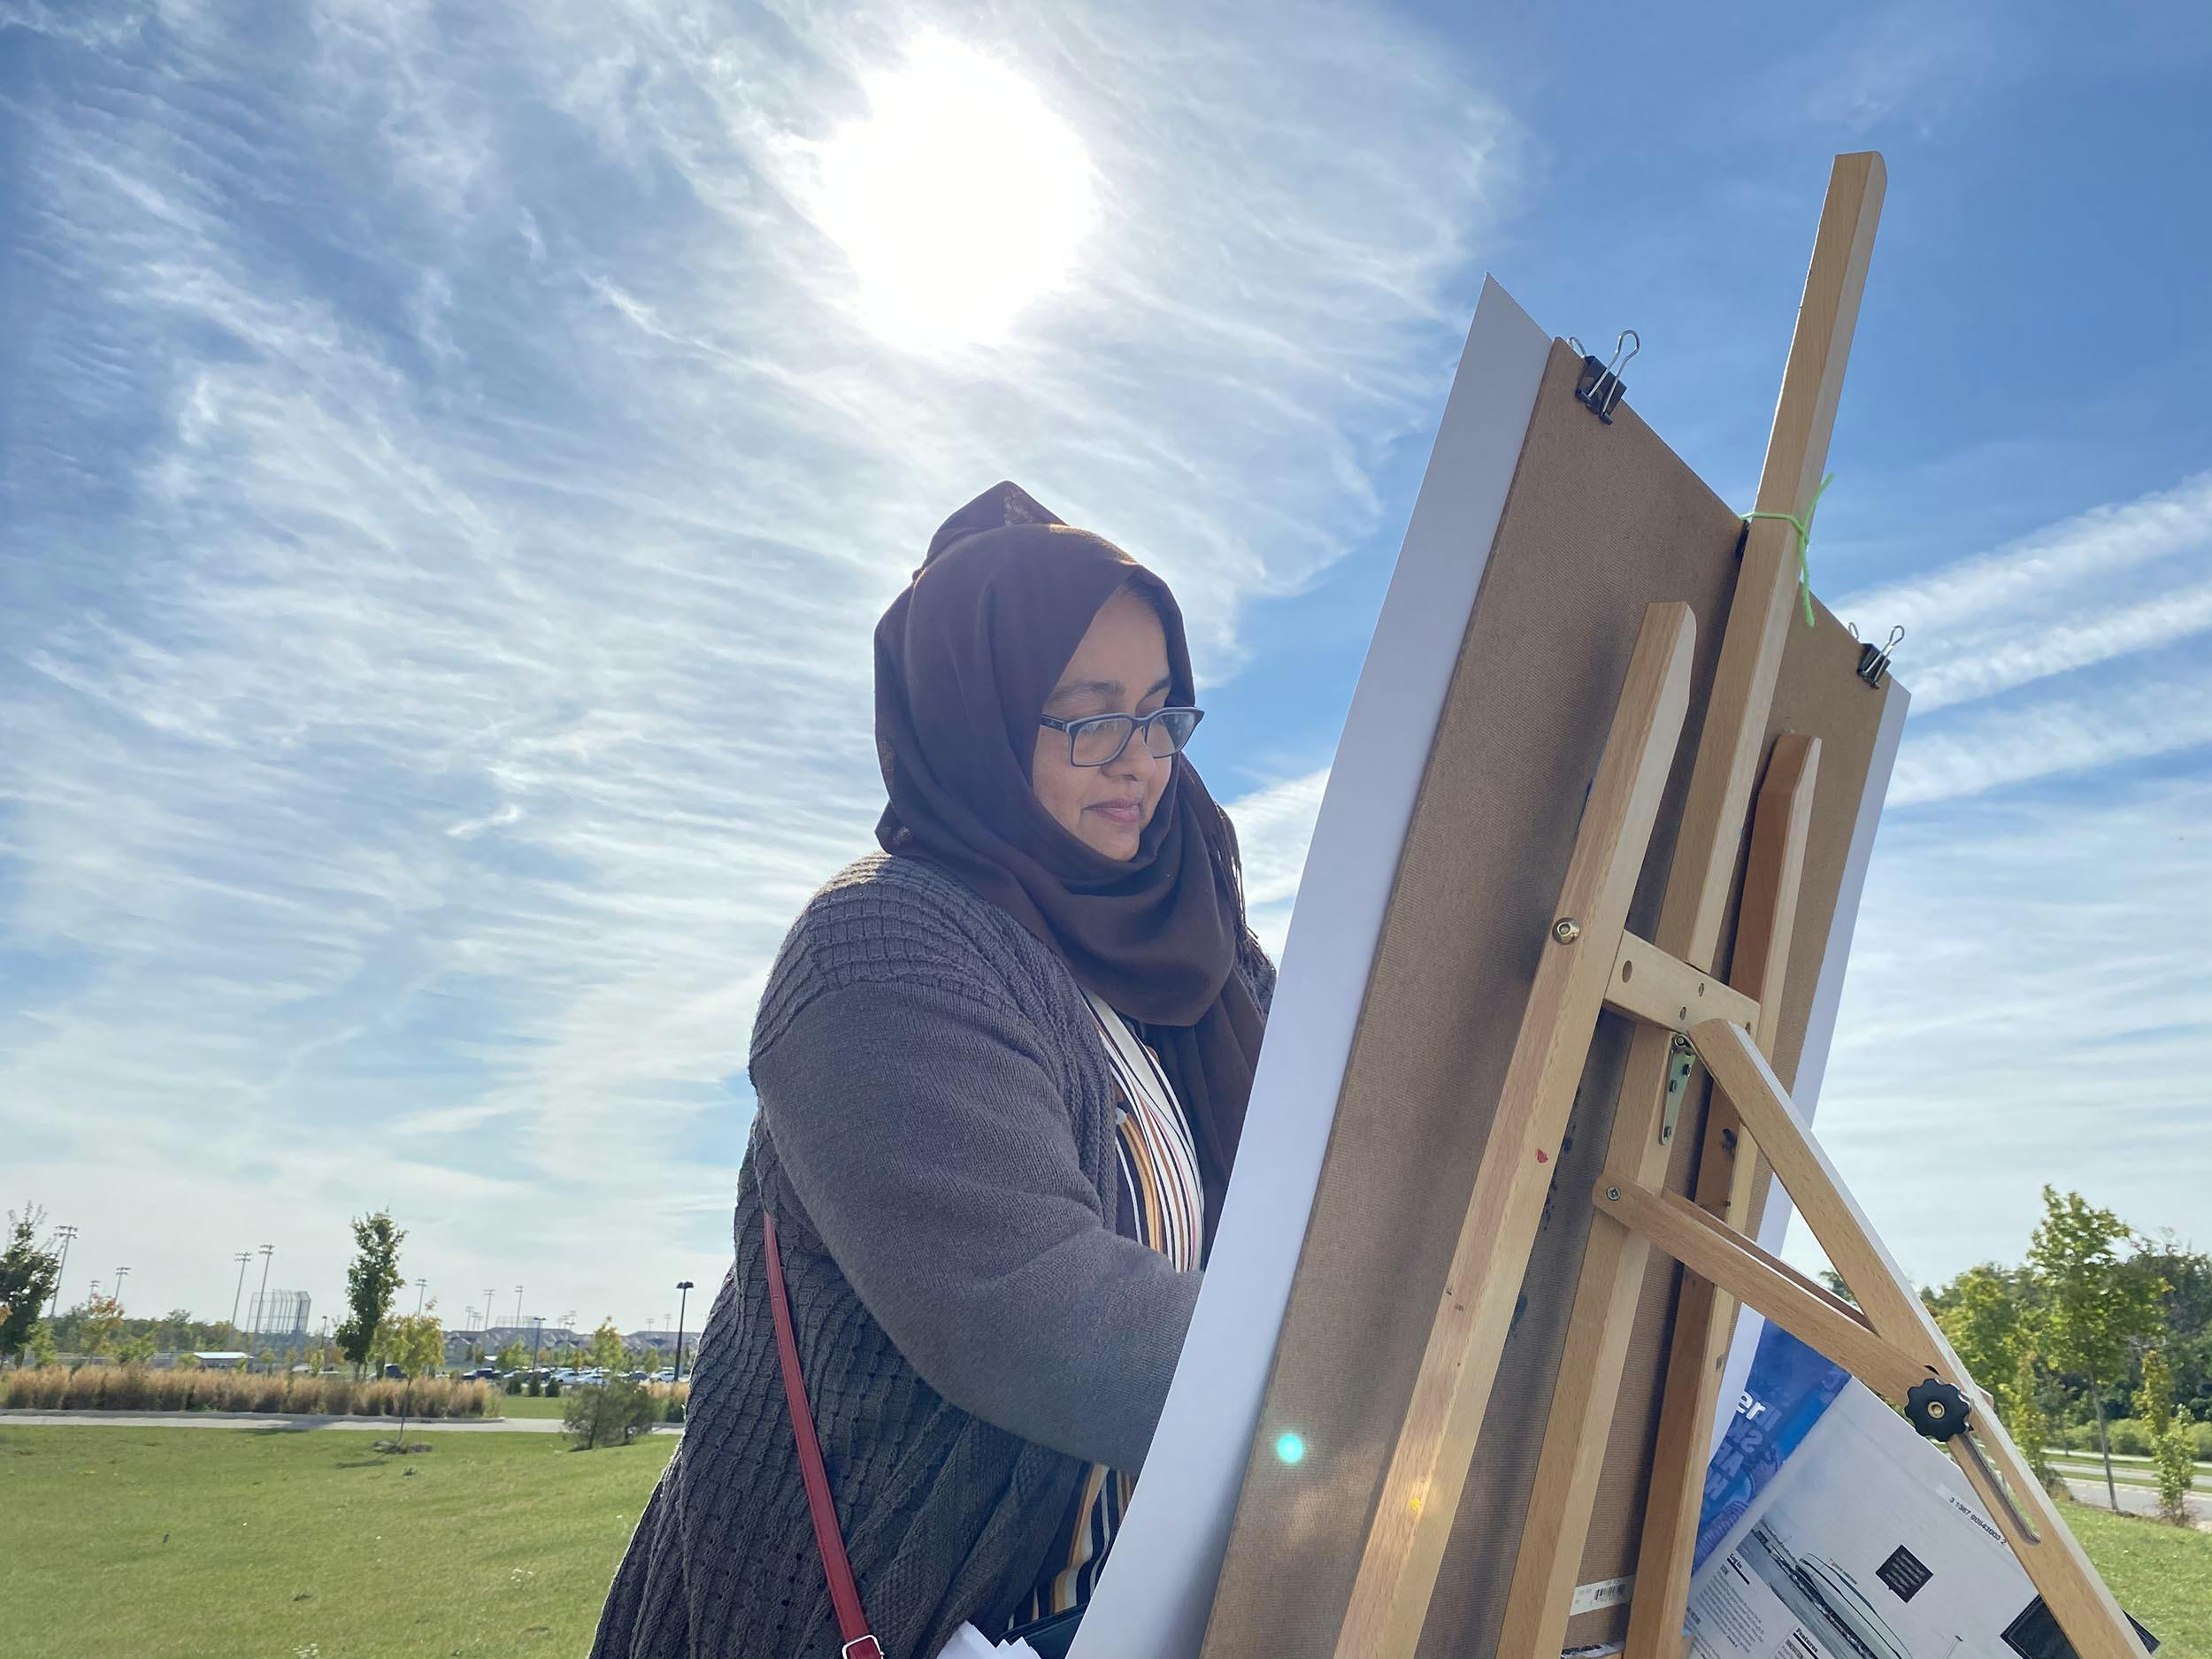 Nargis working at an easel. 